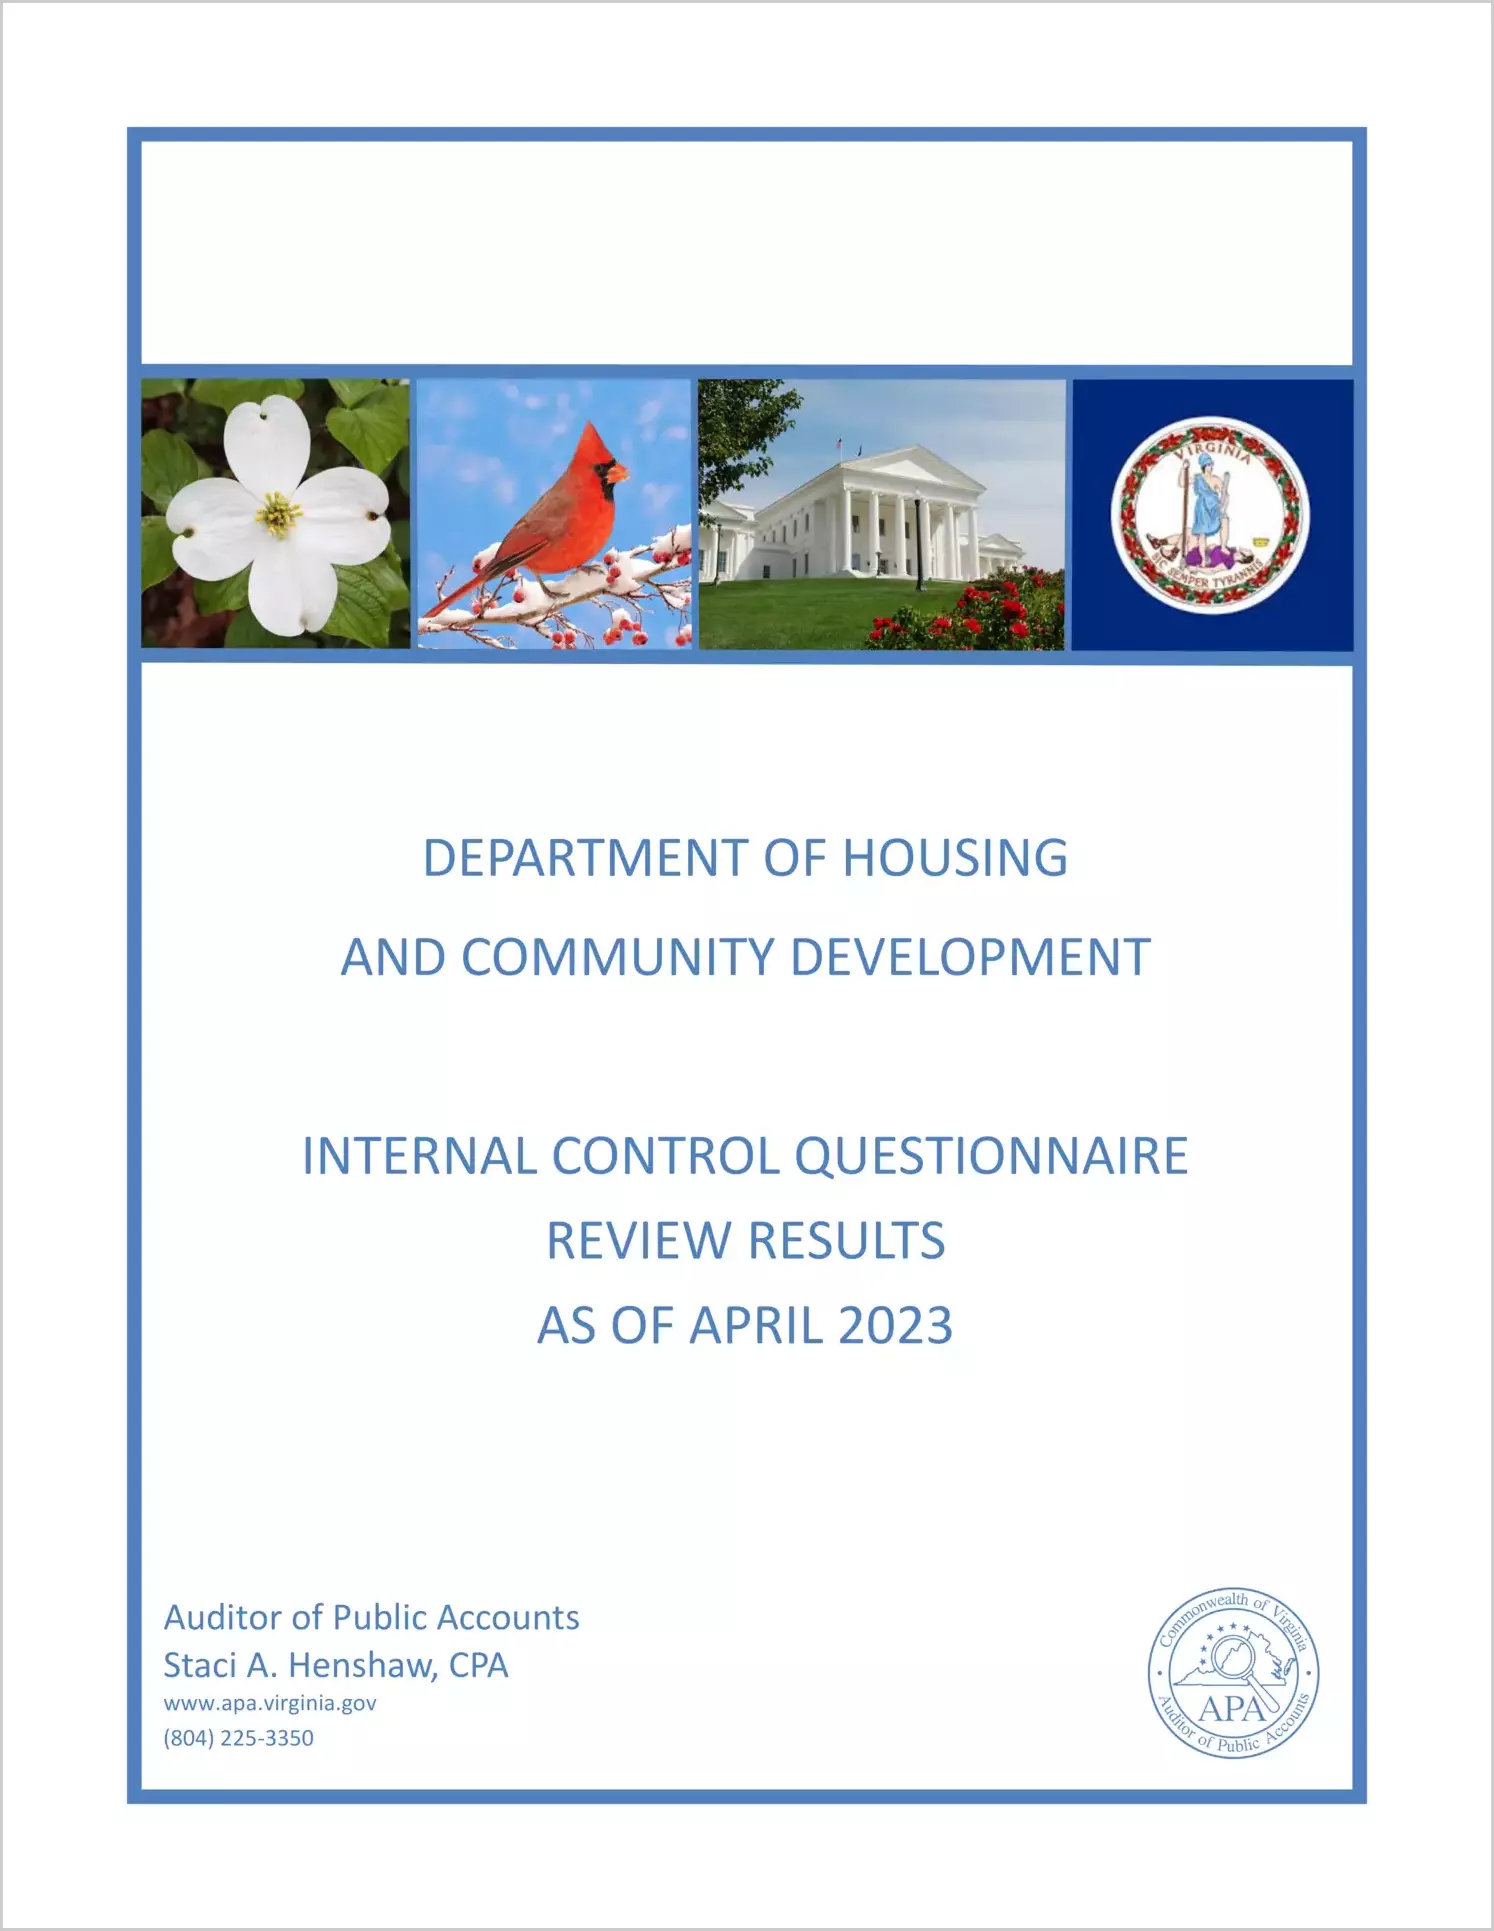 Department of Housing and Community Development Internal Control Questionnaire Review Results as of April 2023